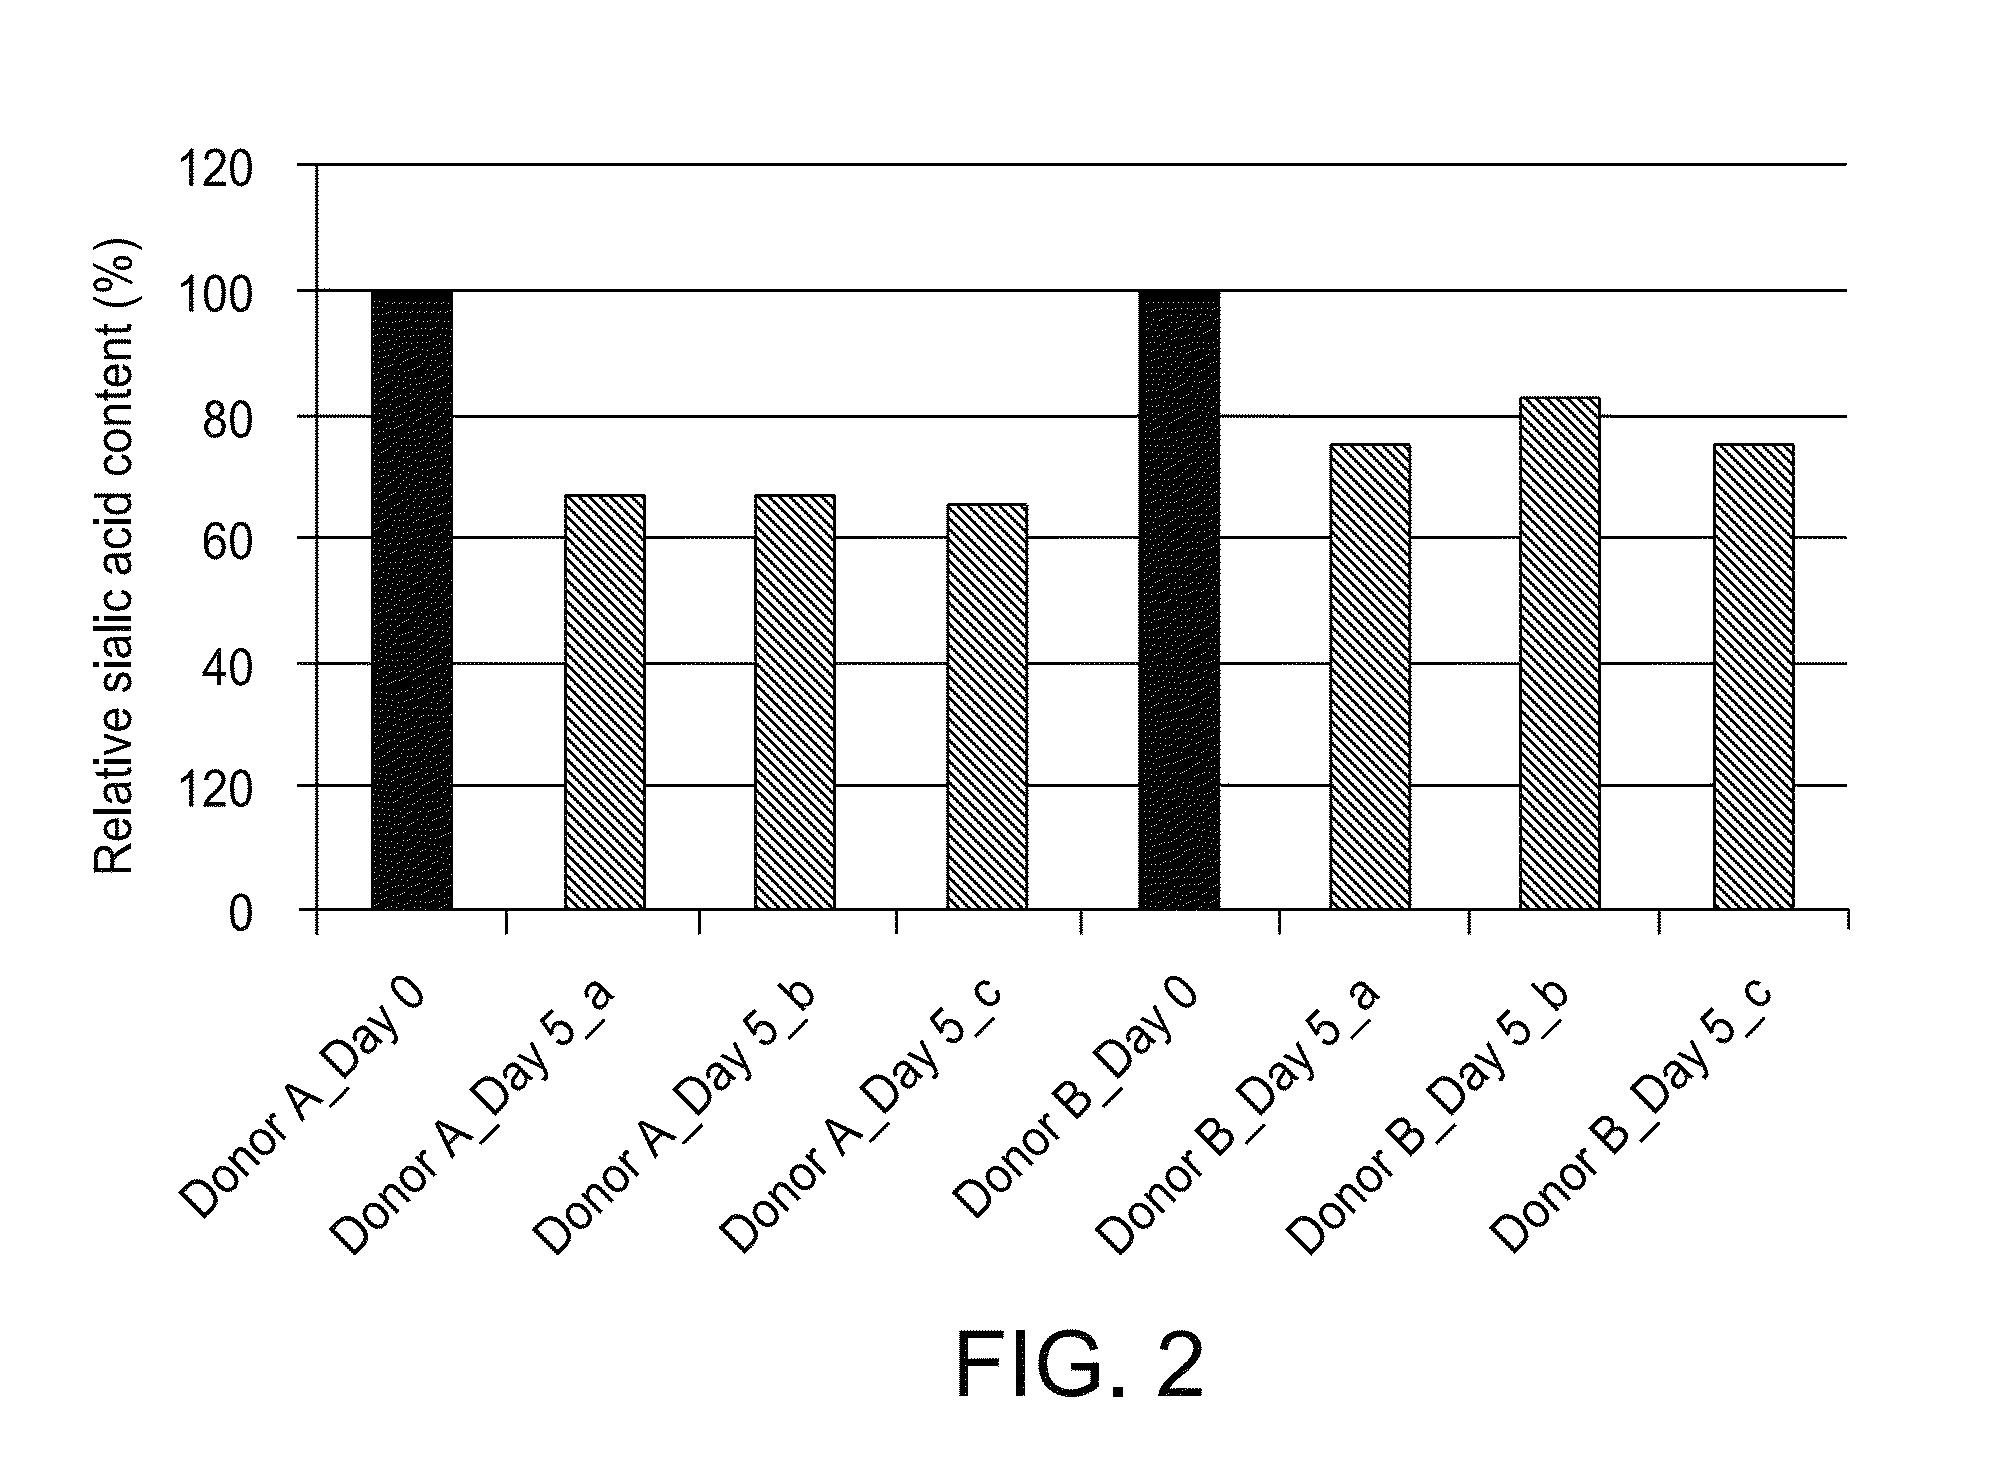 Platelet Storage and Reduced Bacterial Proliferation in Platelet Products Using a Sialidase Inhibitor